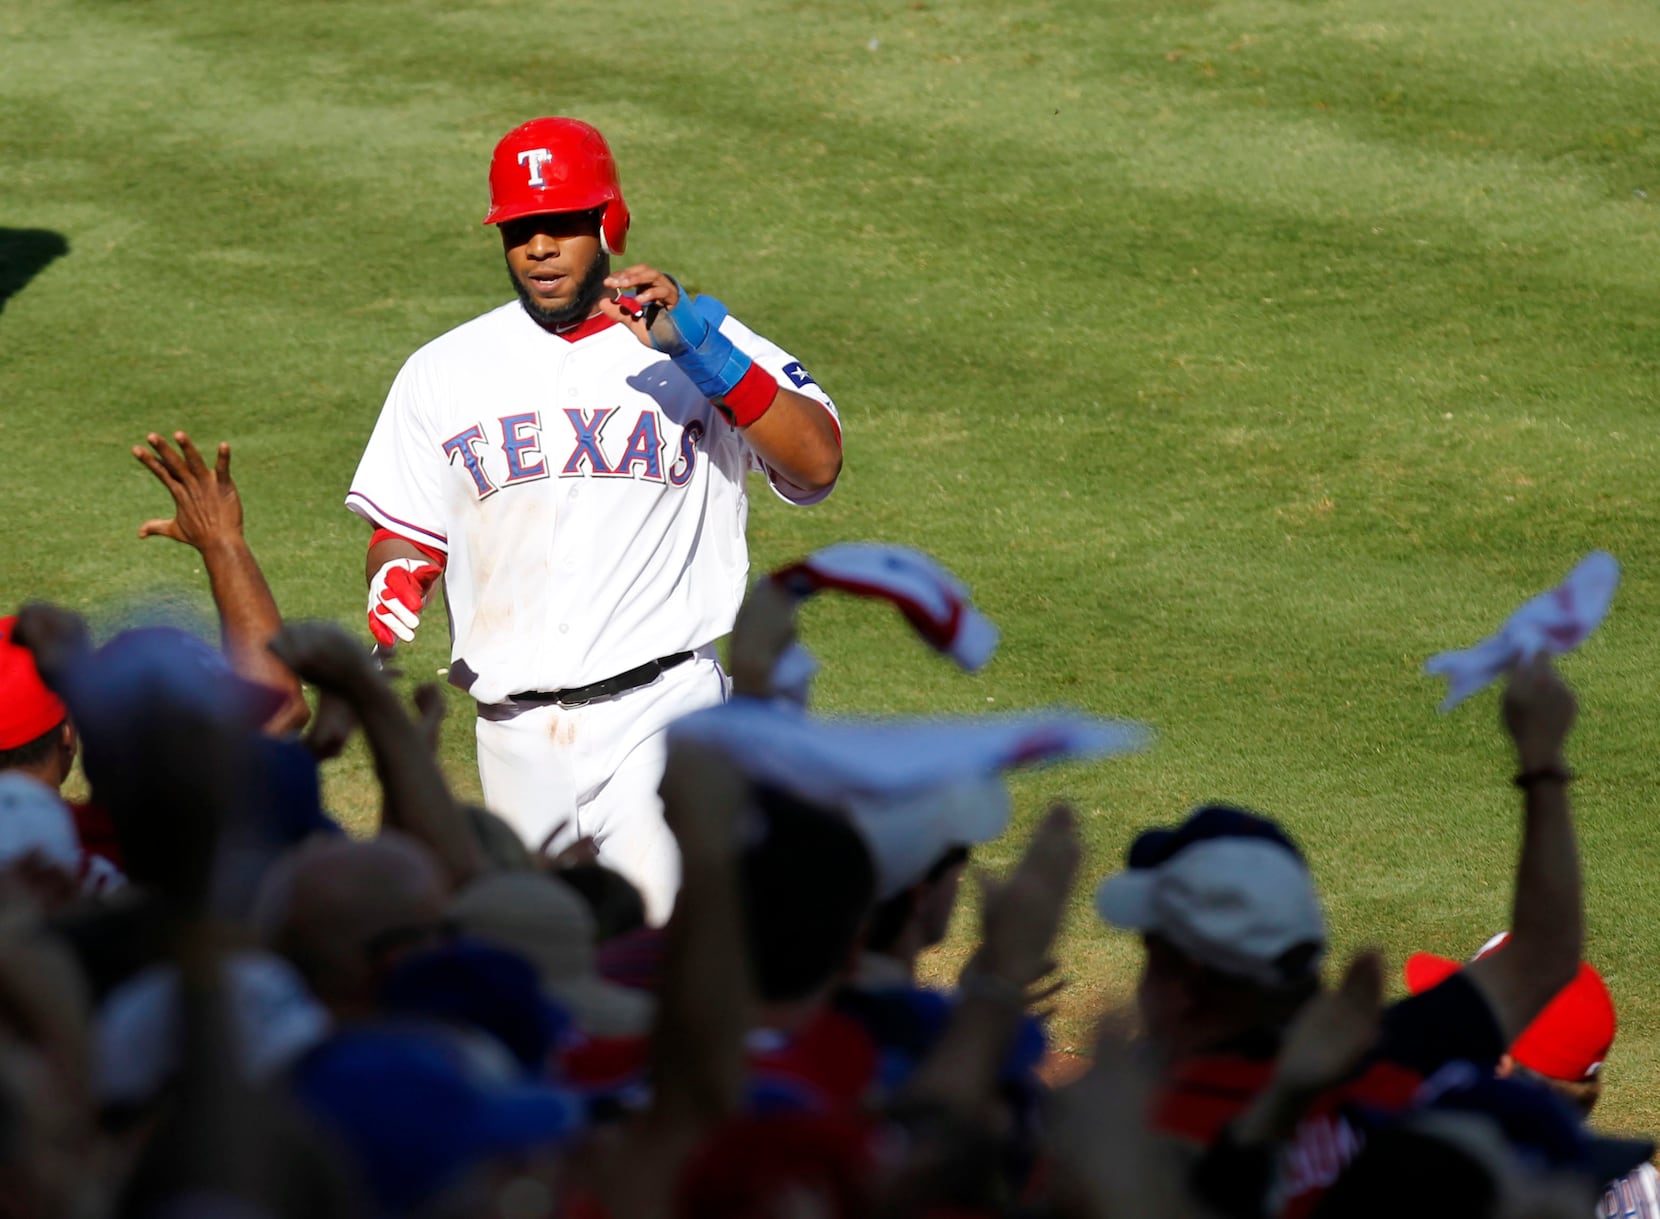 An unexpected career year has Elvis Andrus on the brink of baseball history